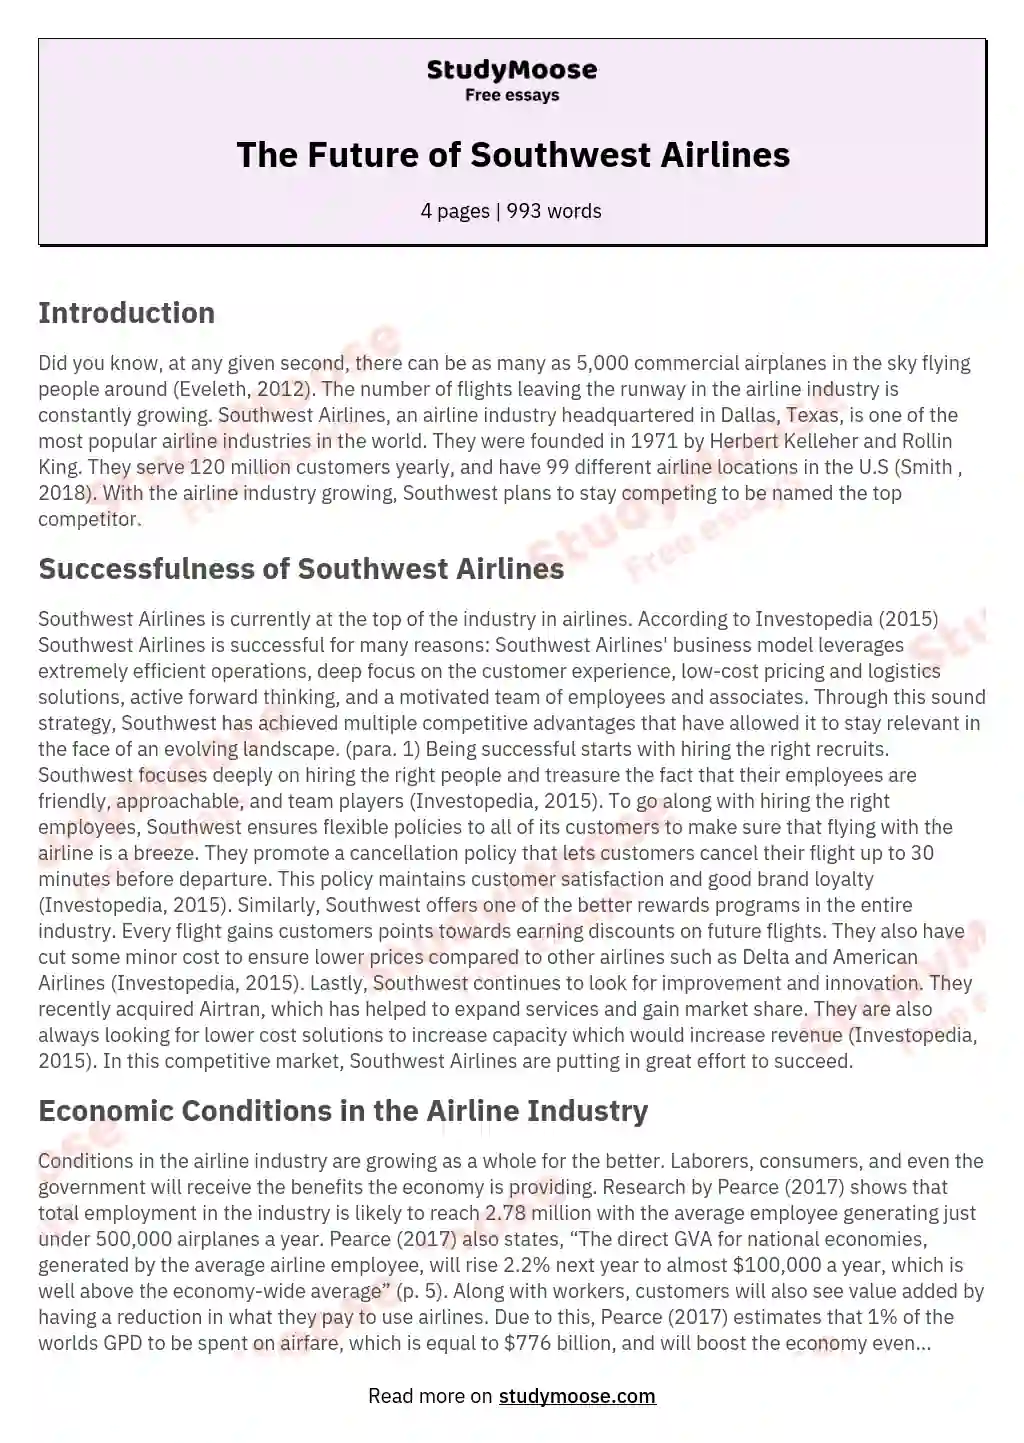 The Future of Southwest Airlines essay